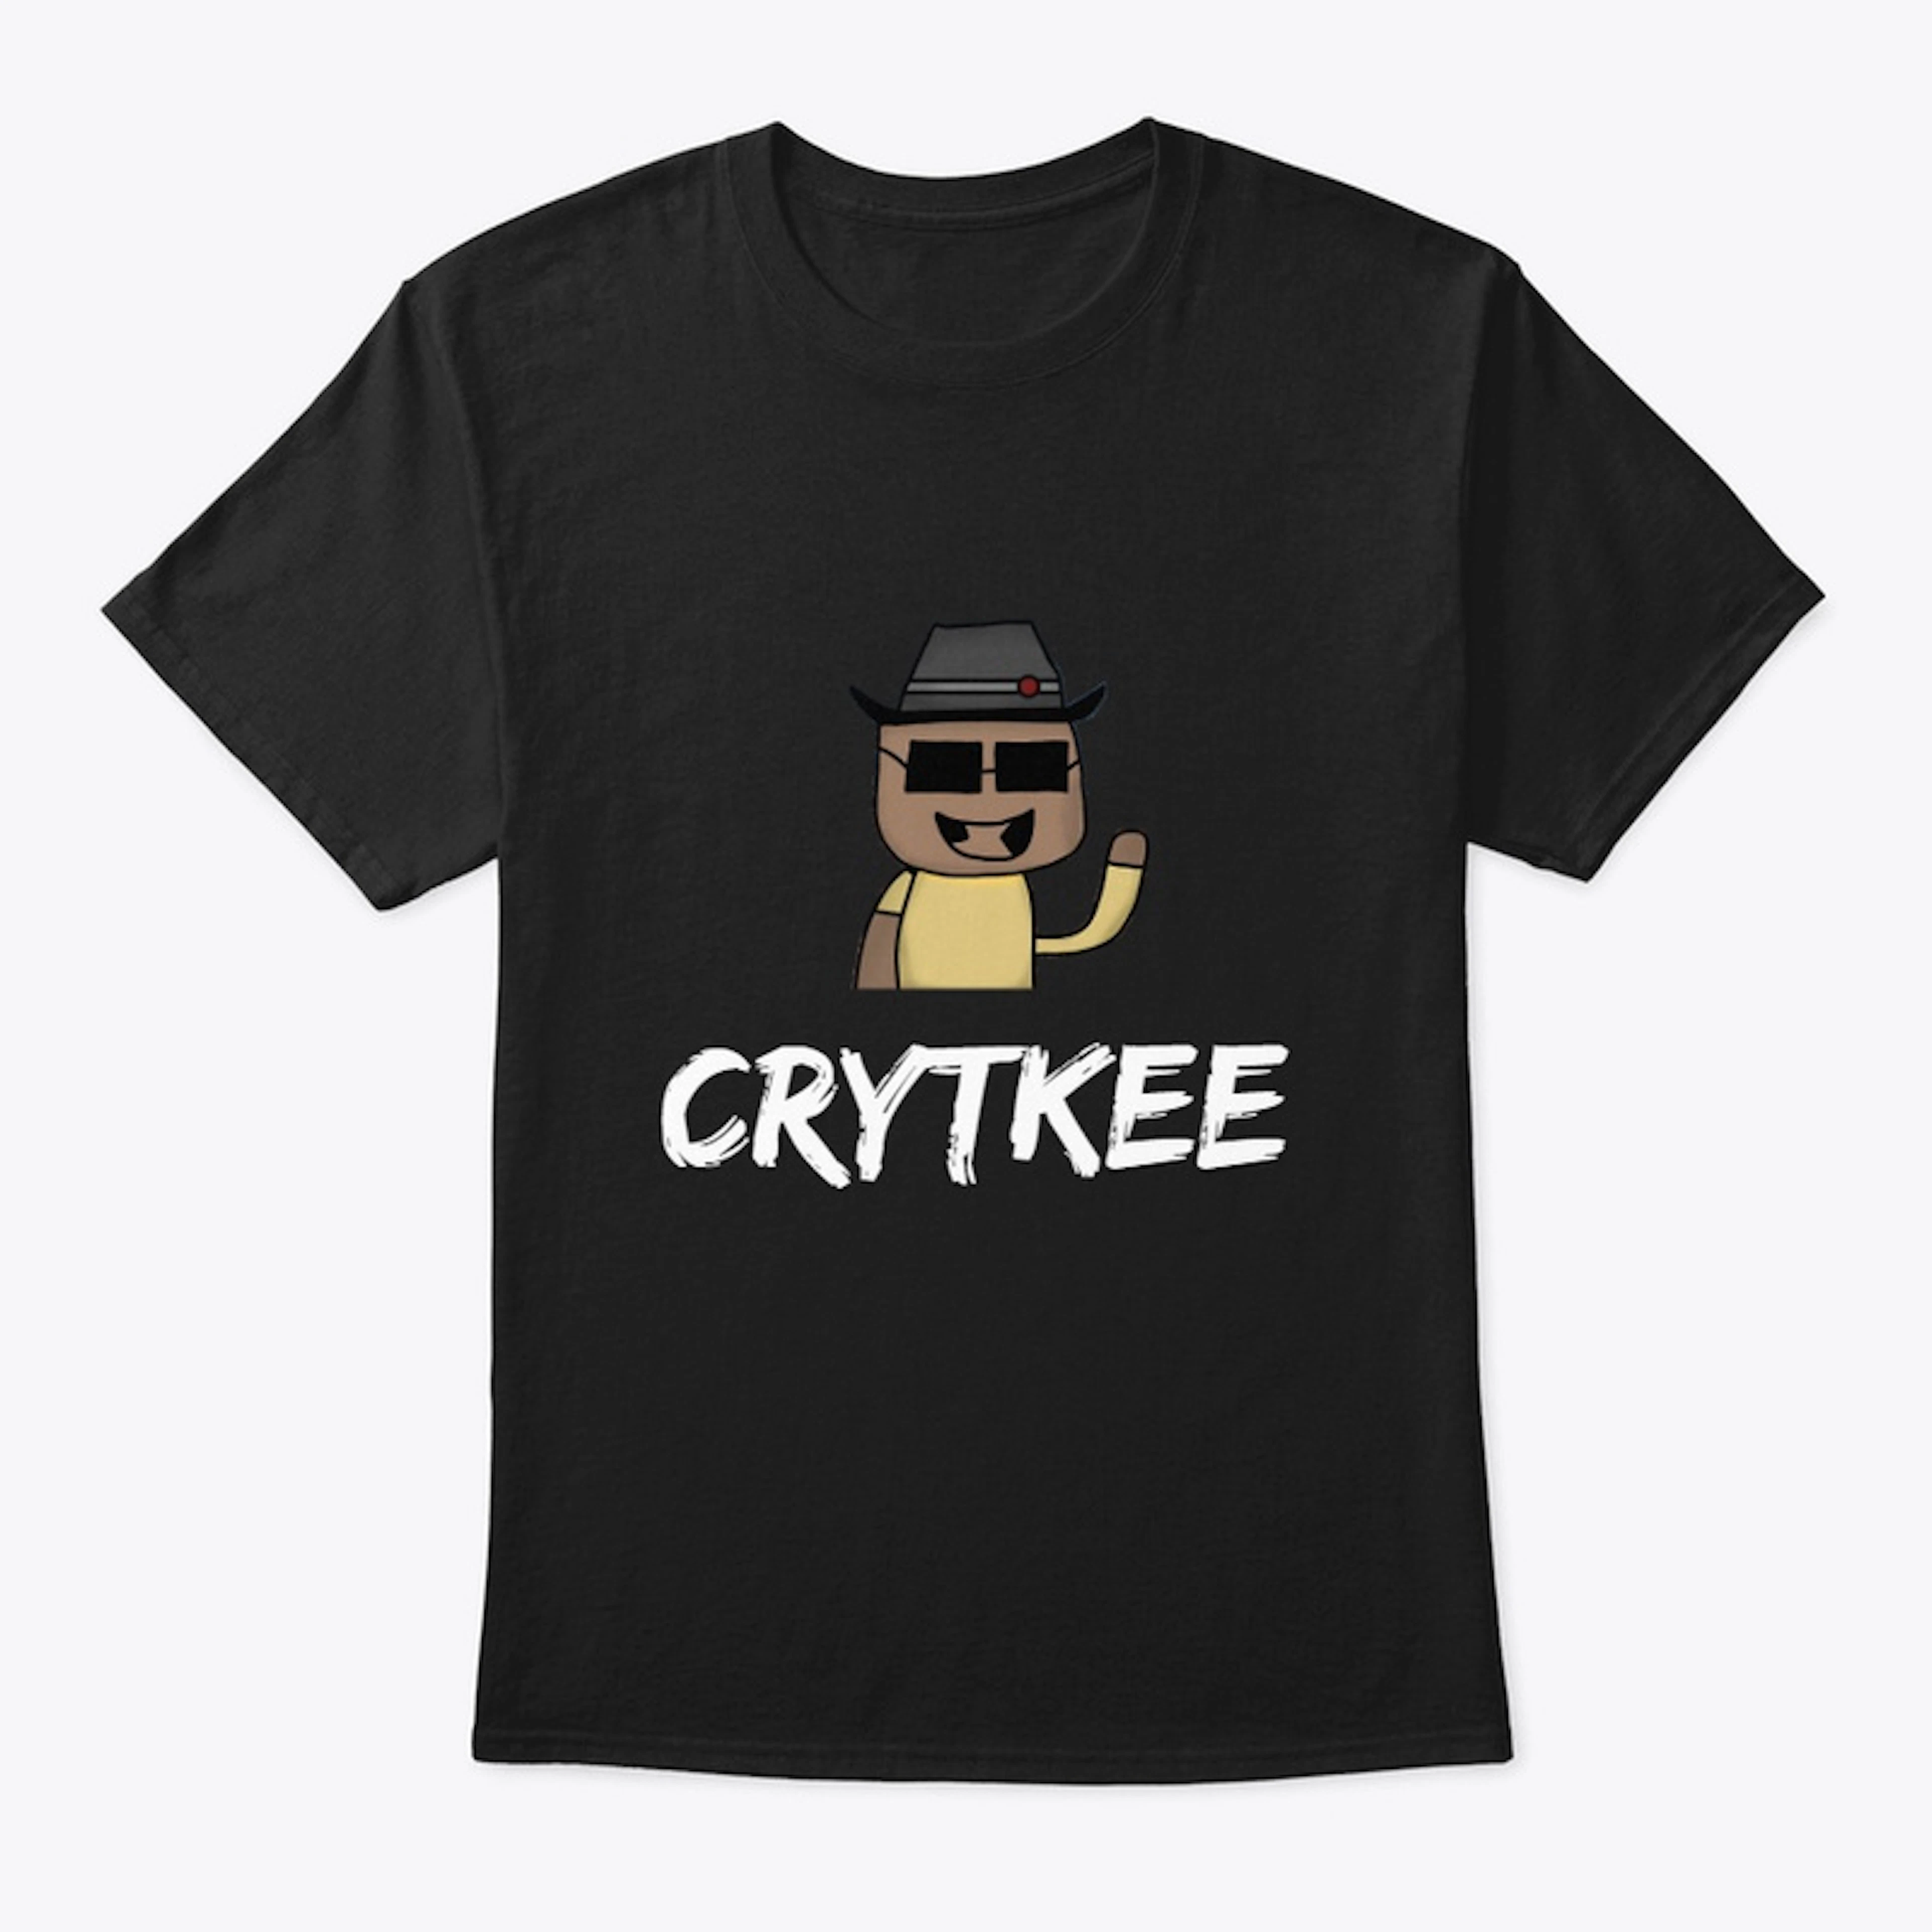 Crytkee's Epic Fan T-Shirt